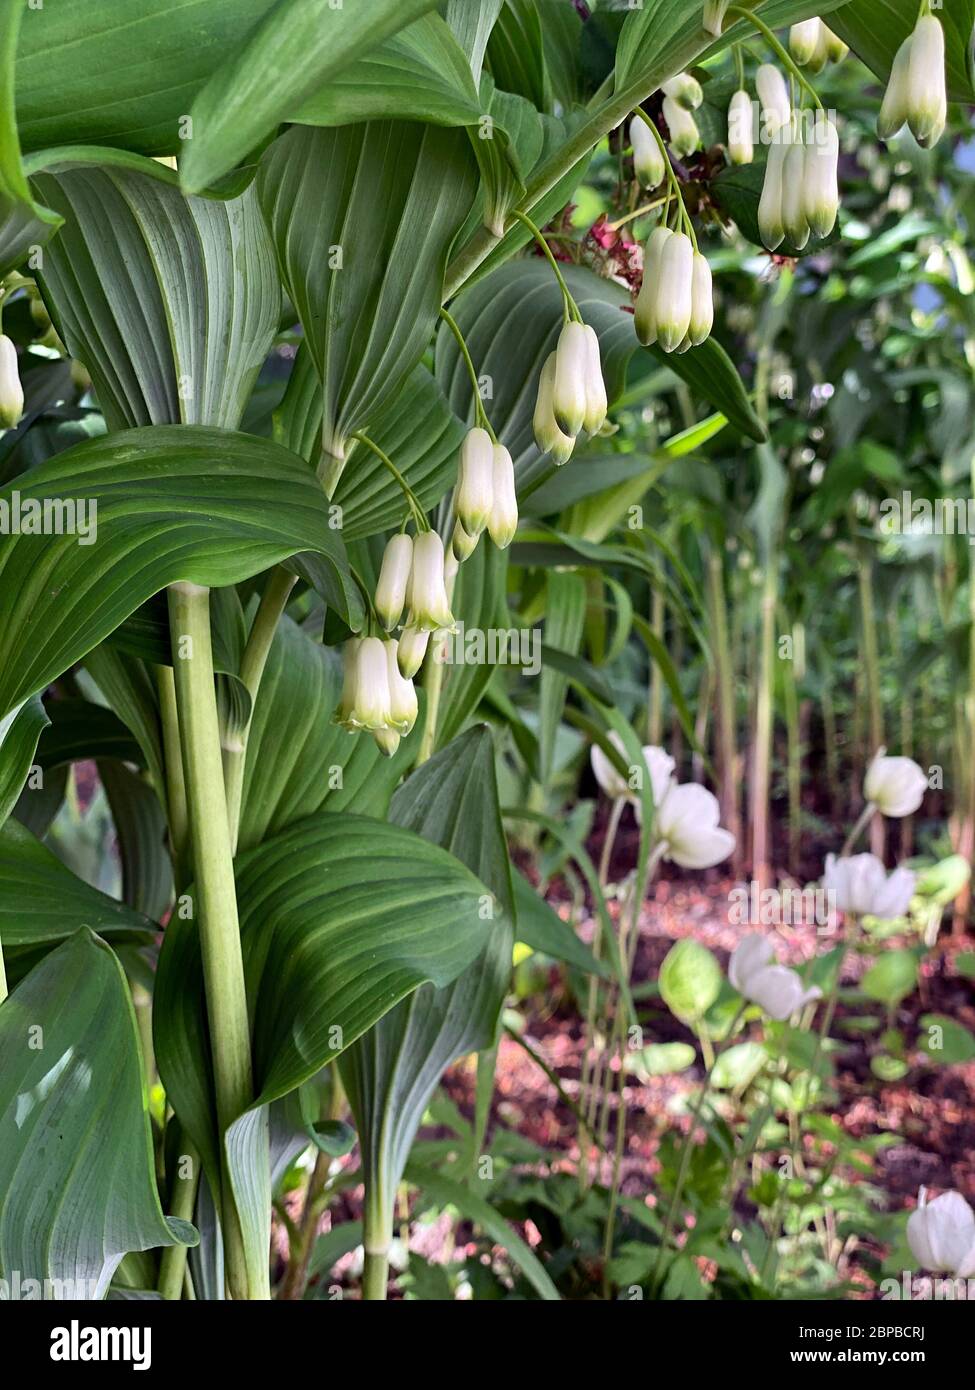 White flowers of Blooming Solomon's seal also known as Polygonatum odoratum in the garden, close up Stock Photo